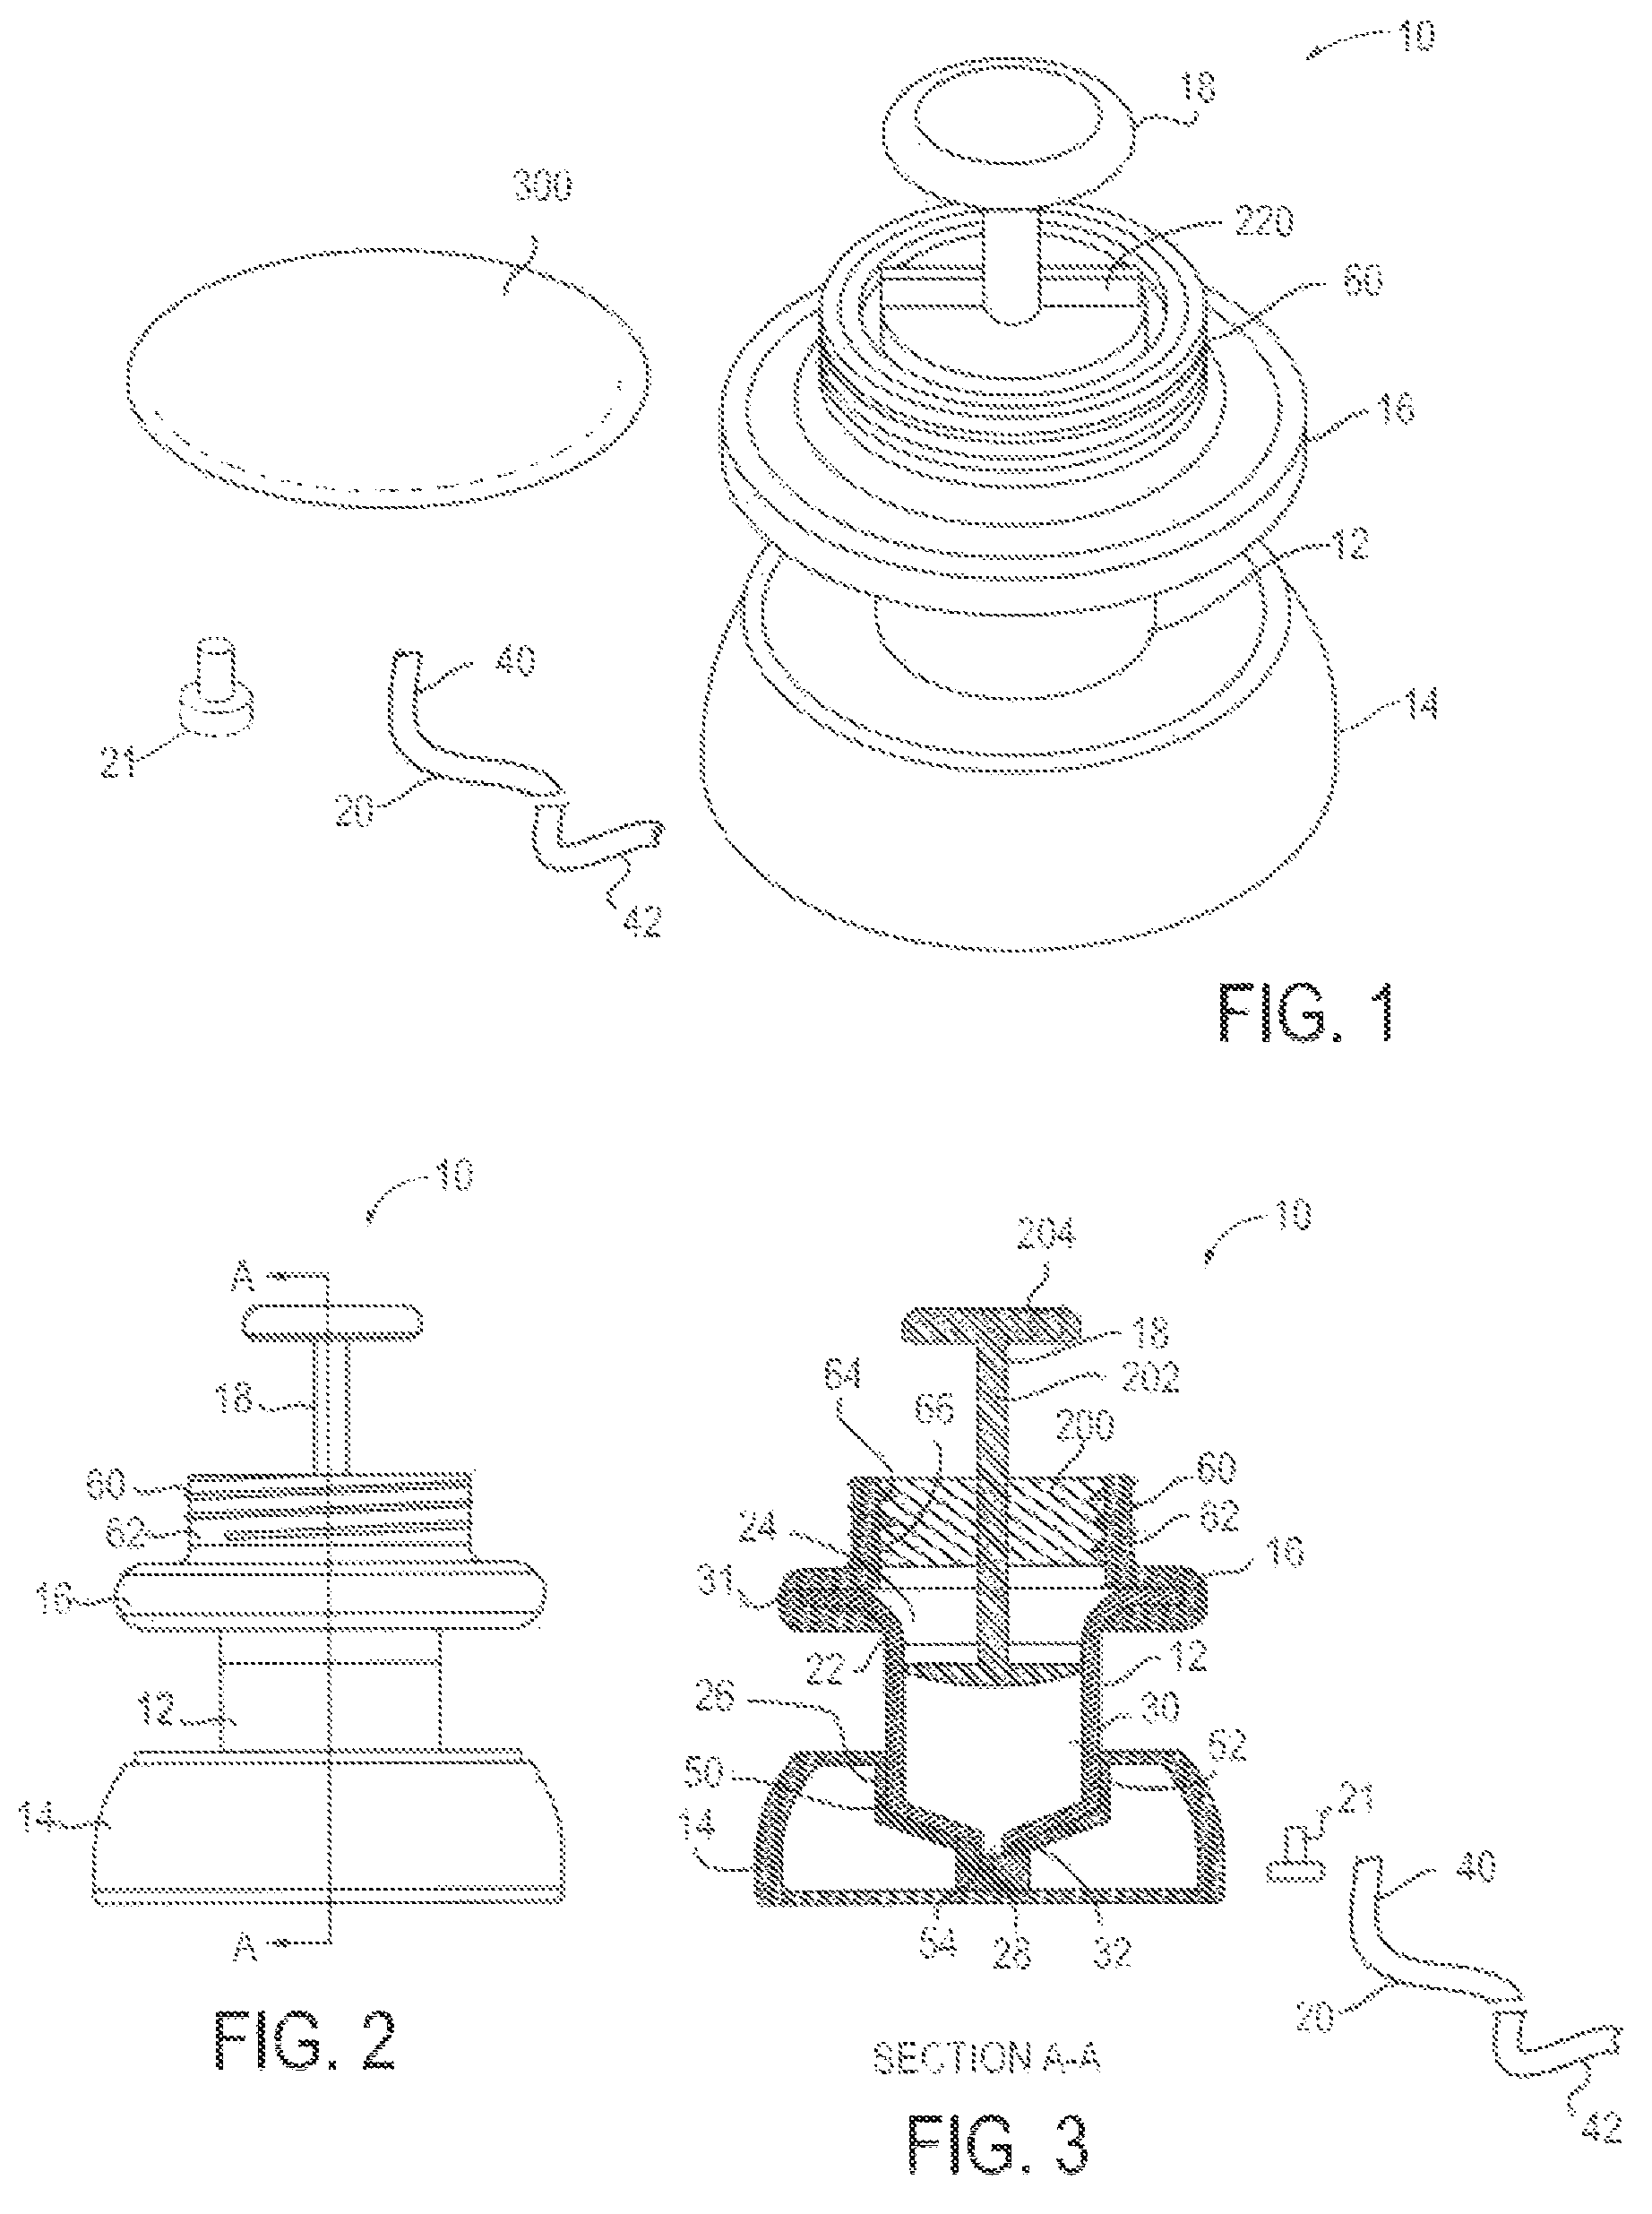 Device and method for collecting and dispensing colostrum